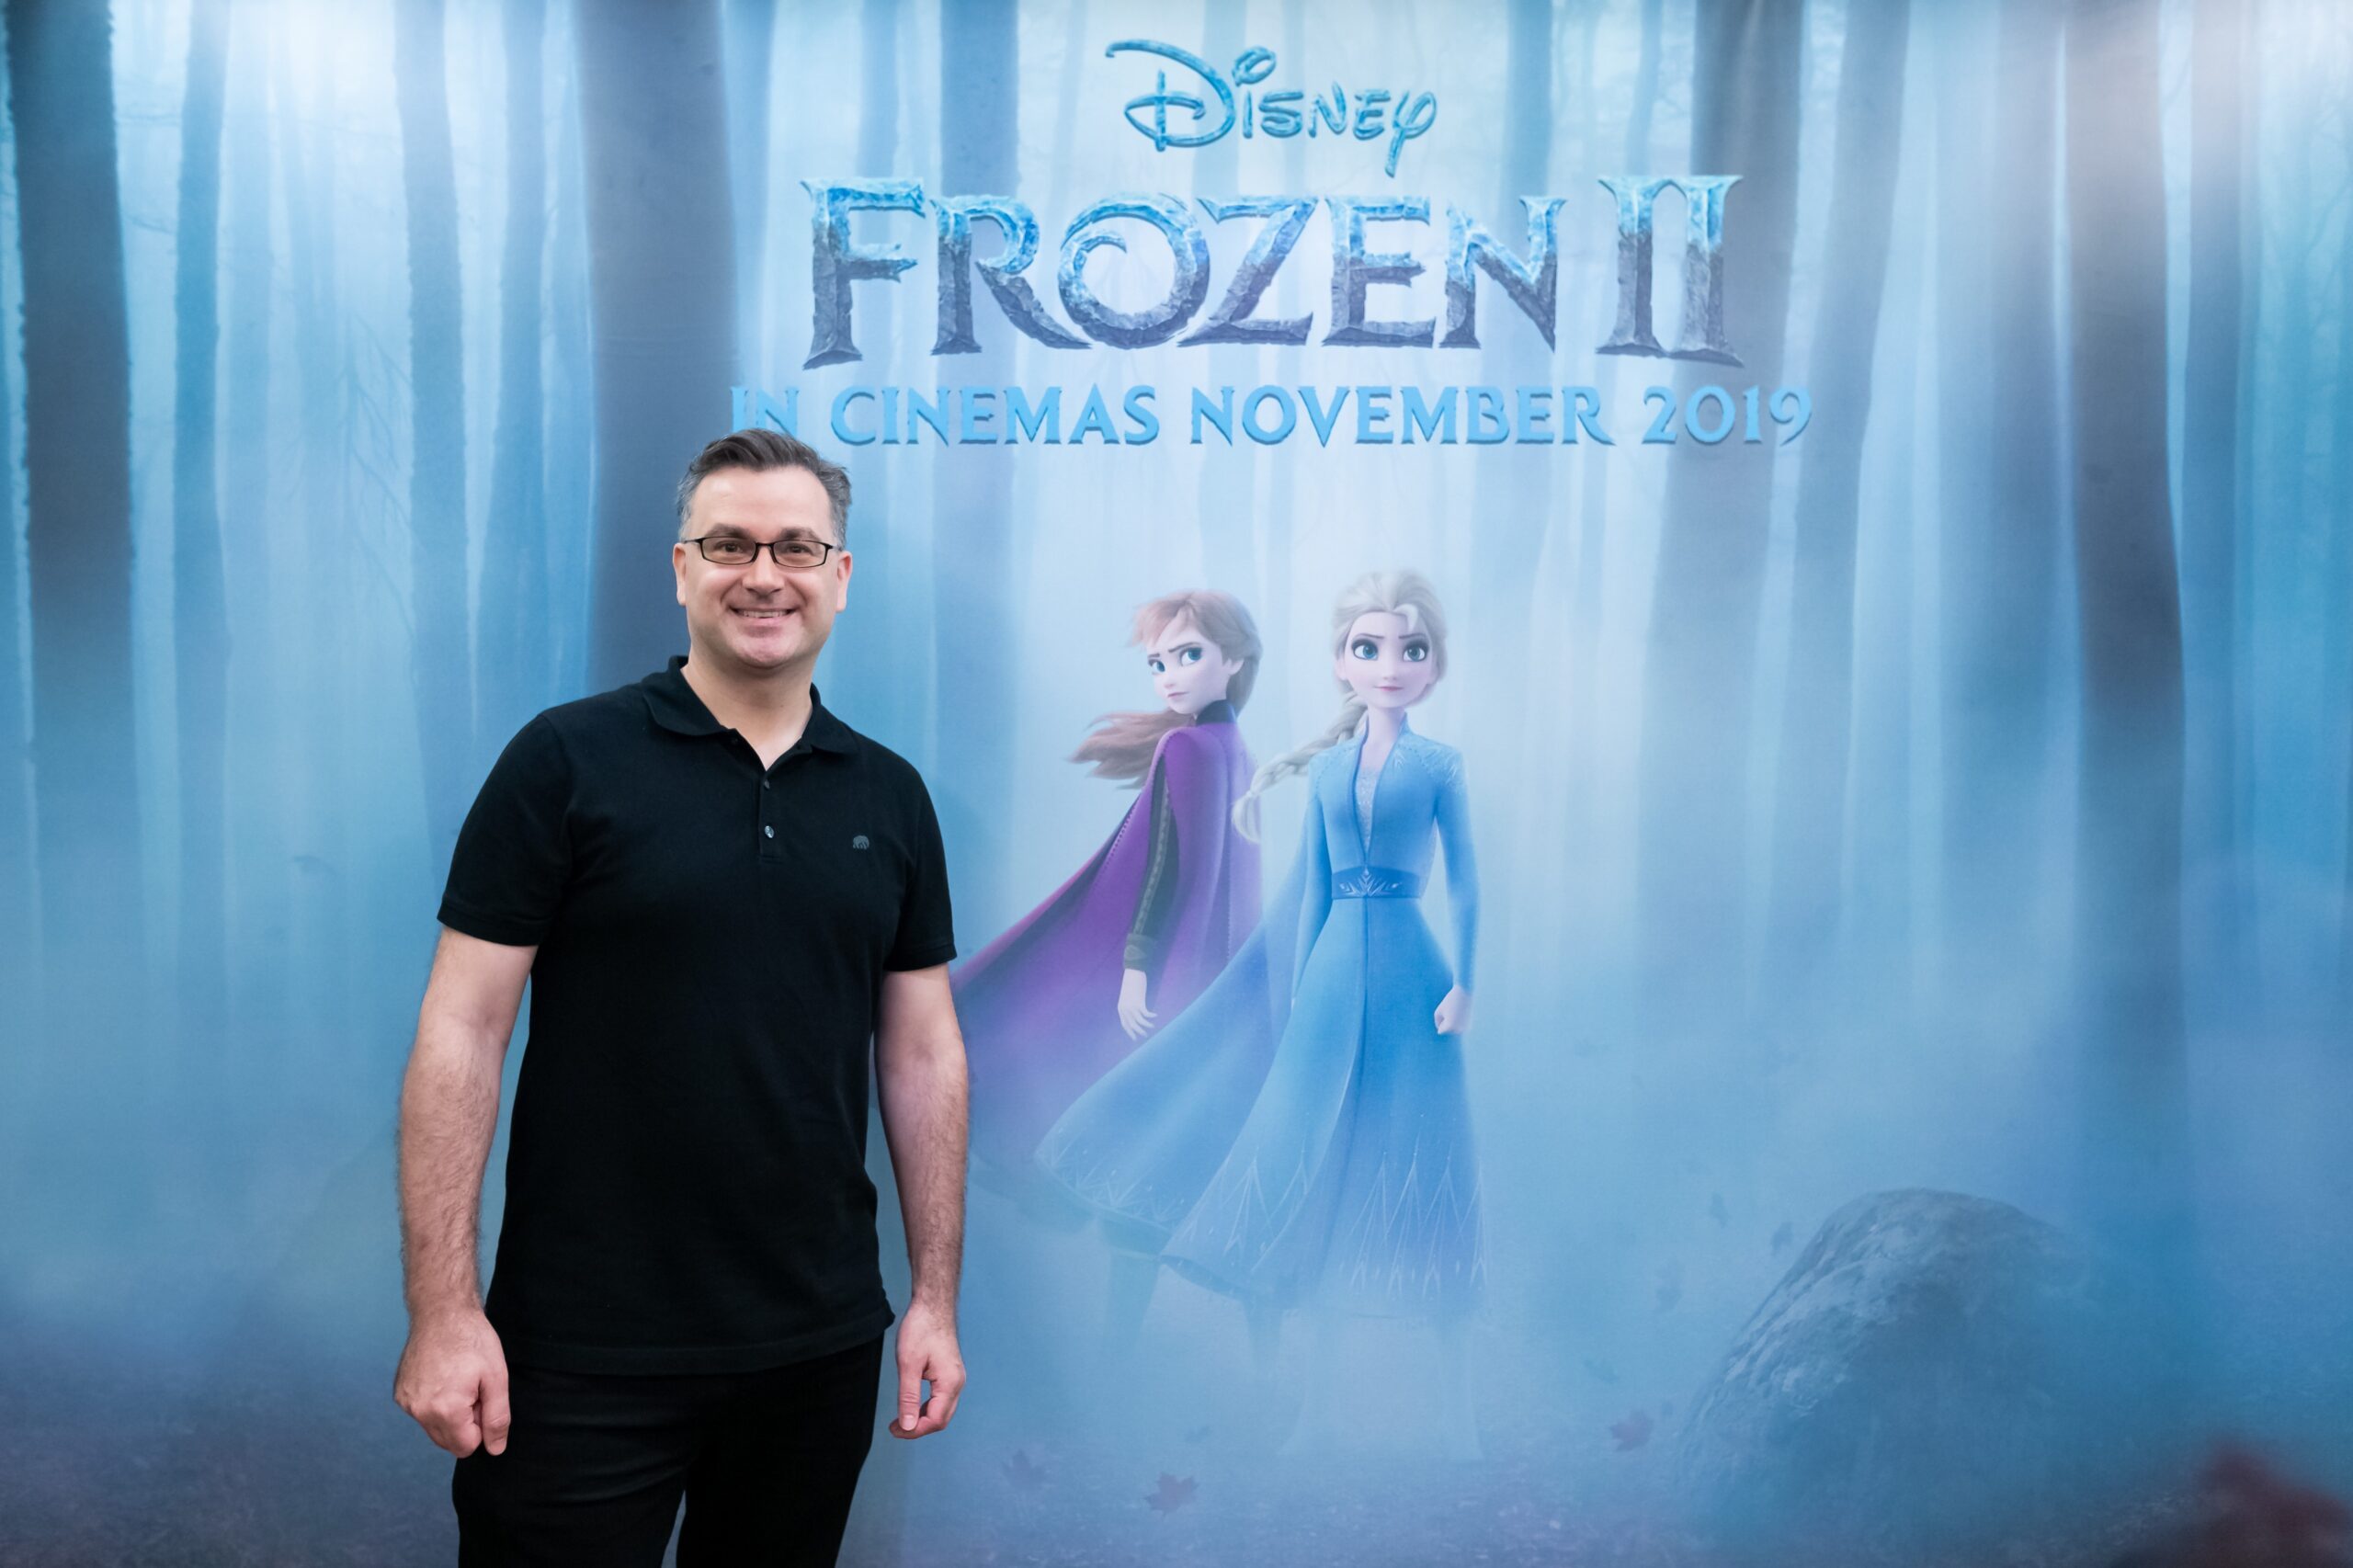 Disney dream job: What it’s like to work behind-the-scenes of ‘Frozen 2’